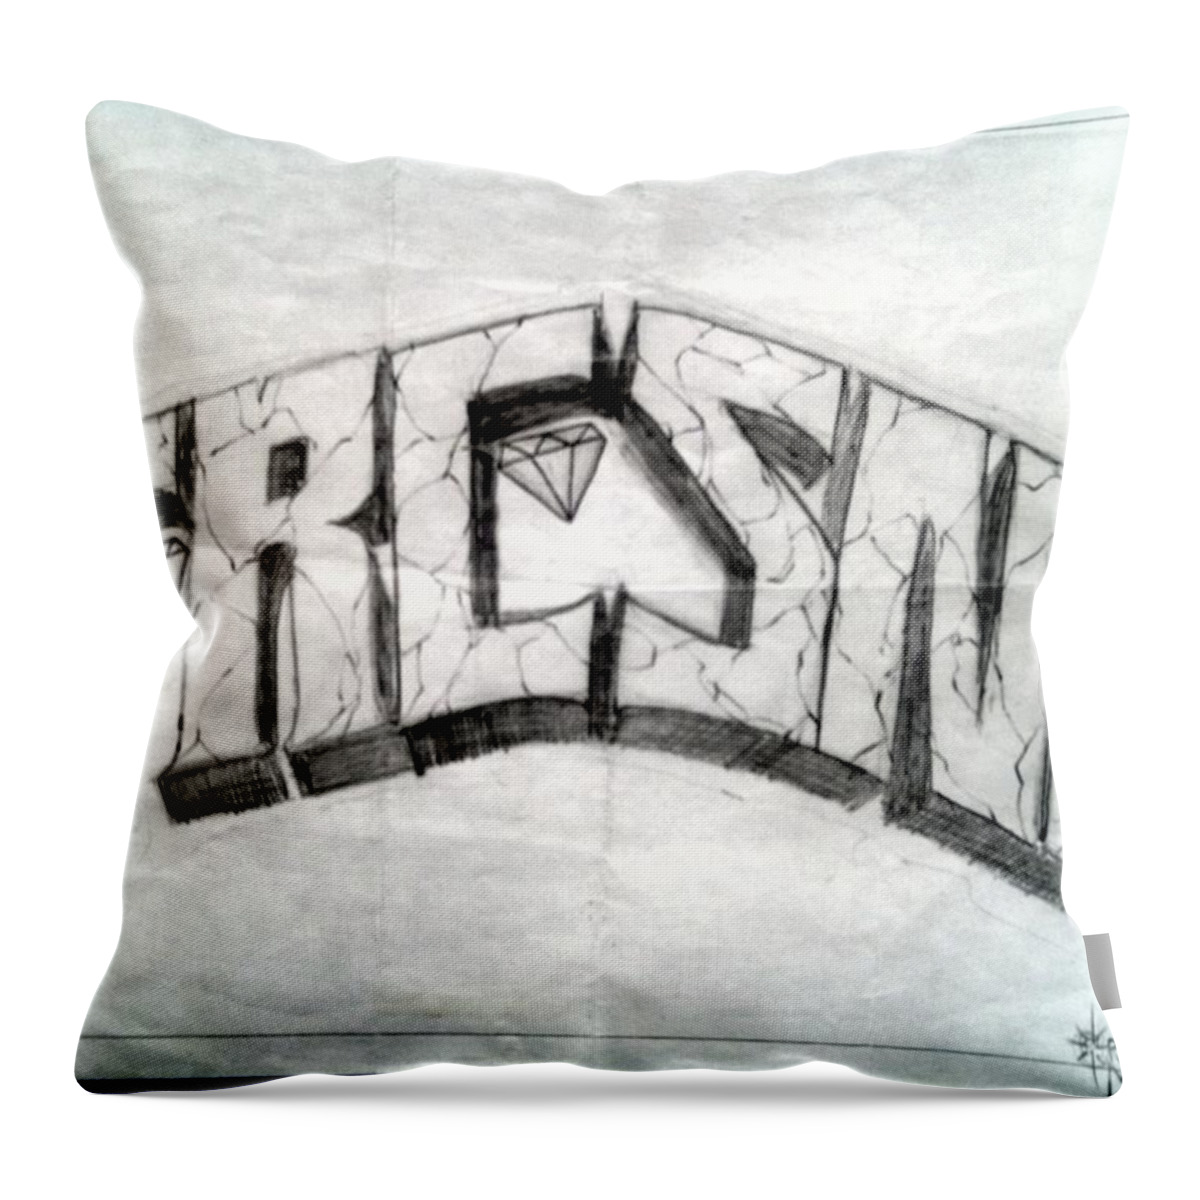 Black Art Throw Pillow featuring the drawing Untitled 1 by A S